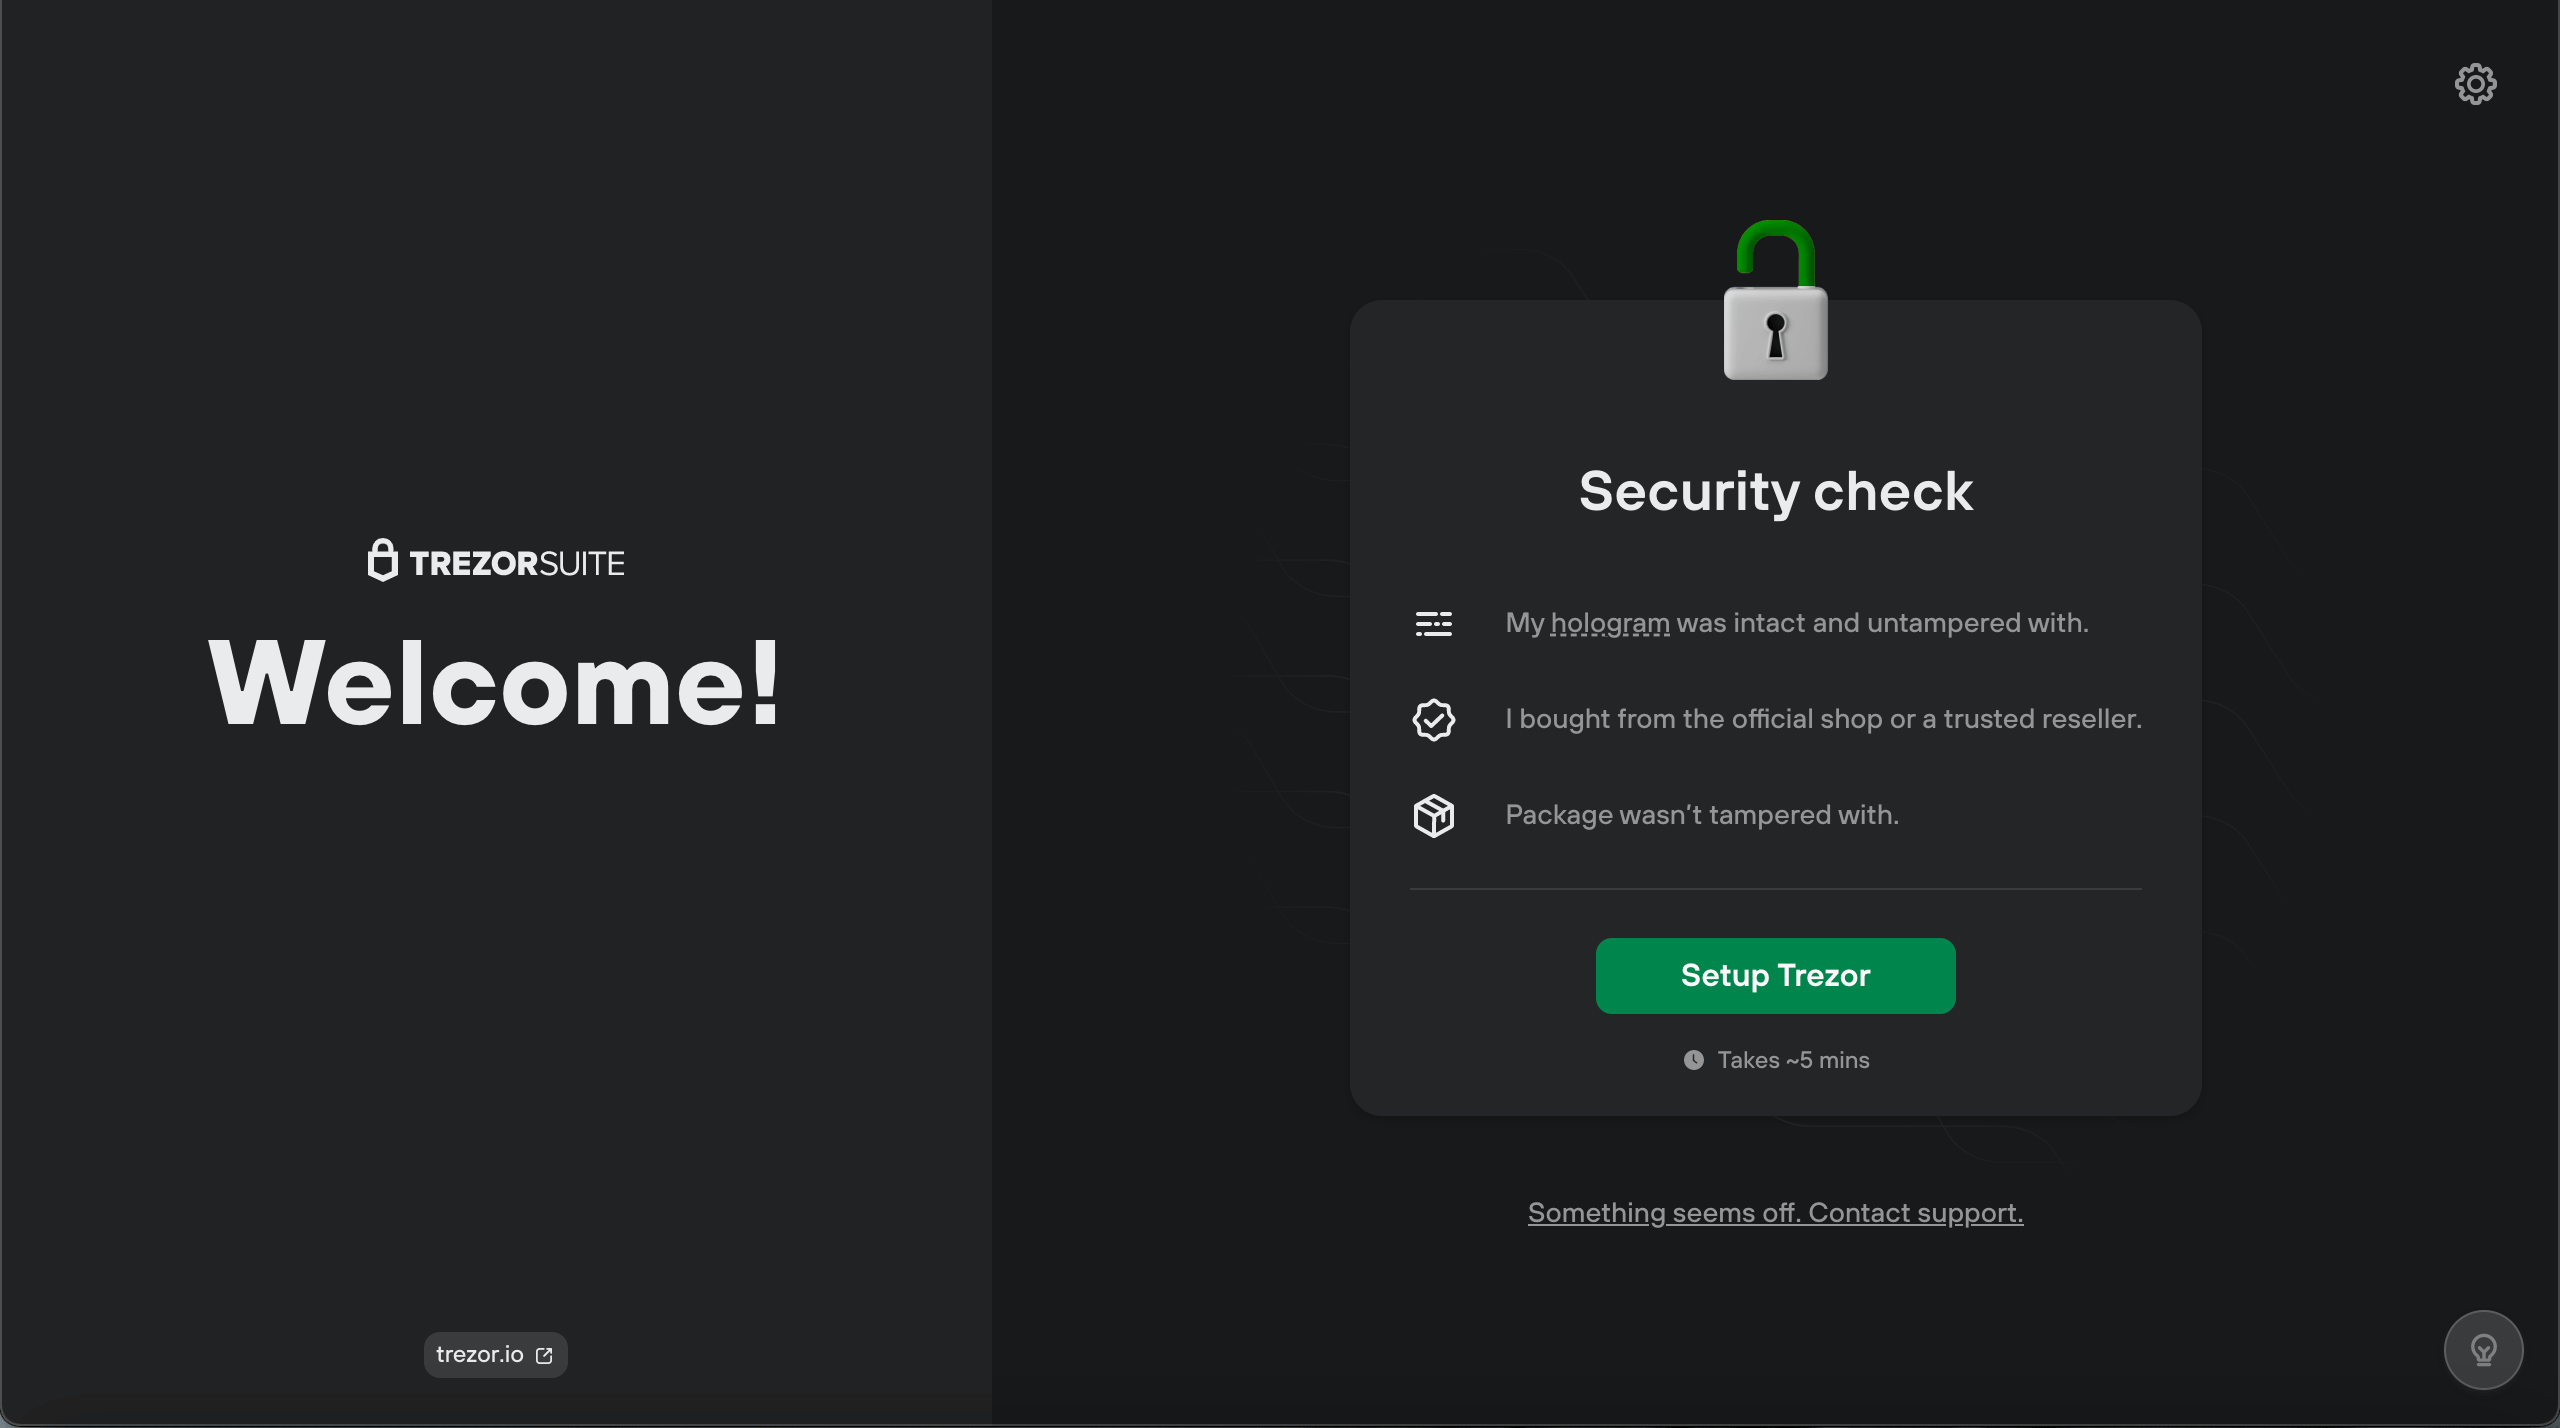 Trezor Welcome and Security Check